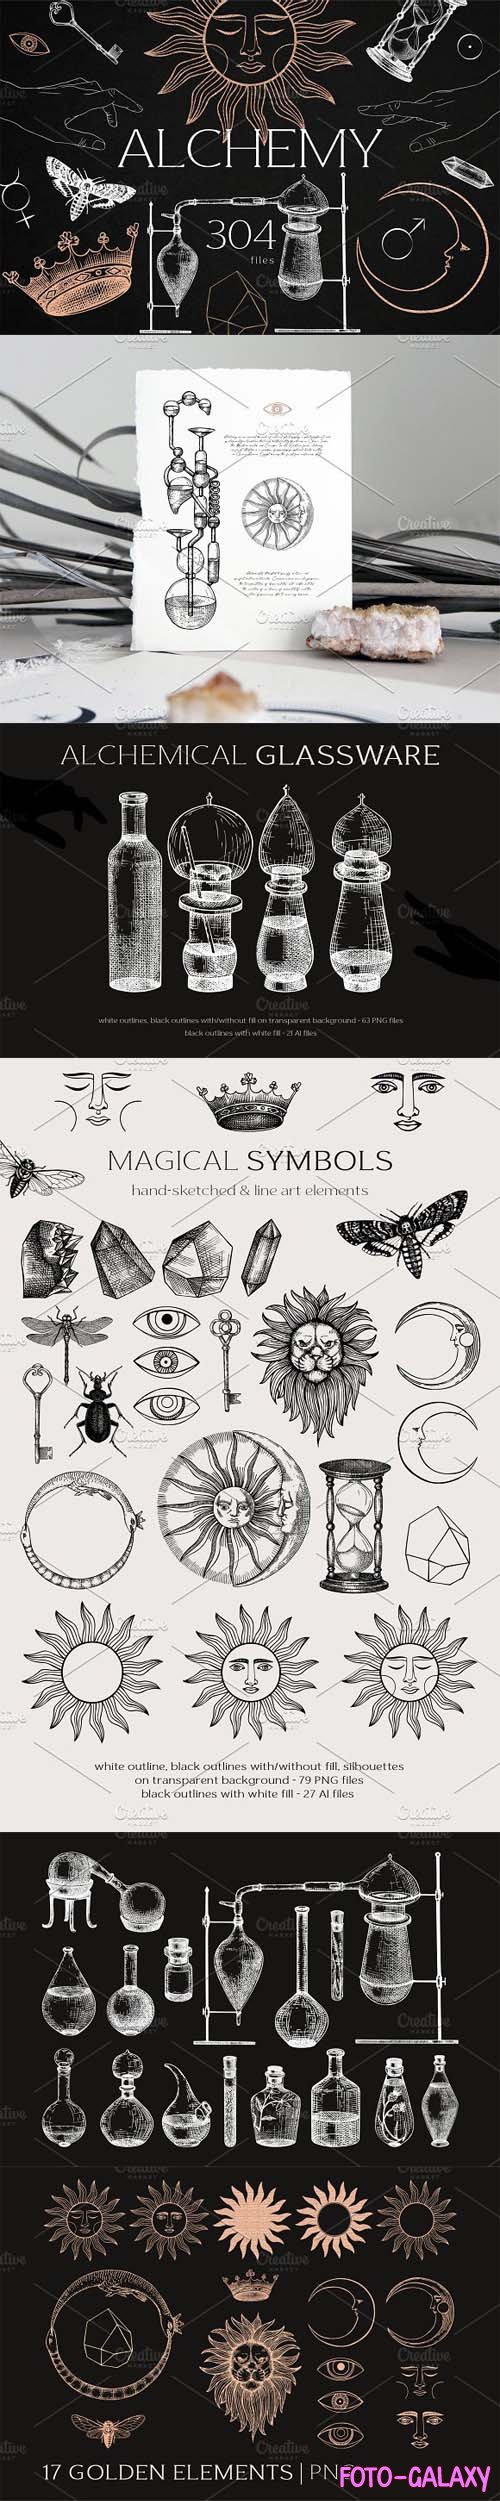 Alchemy - Magical Elements & Symbols - Modern Graphic Collection